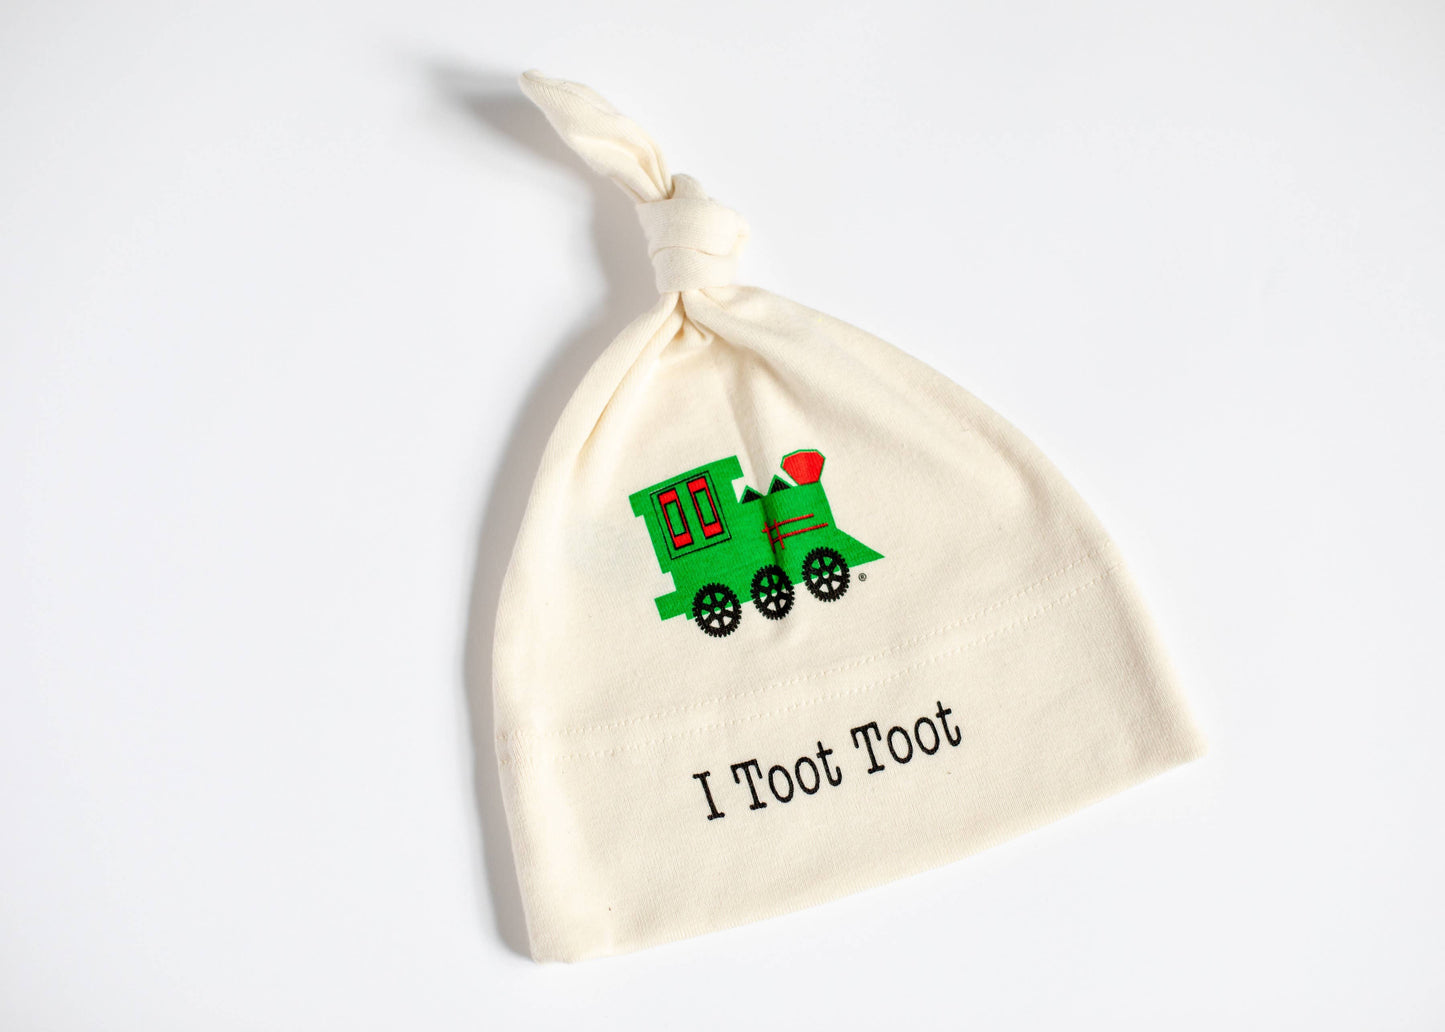 Organic Cotton Baby Hat "I toot toot" from Simply Chickie